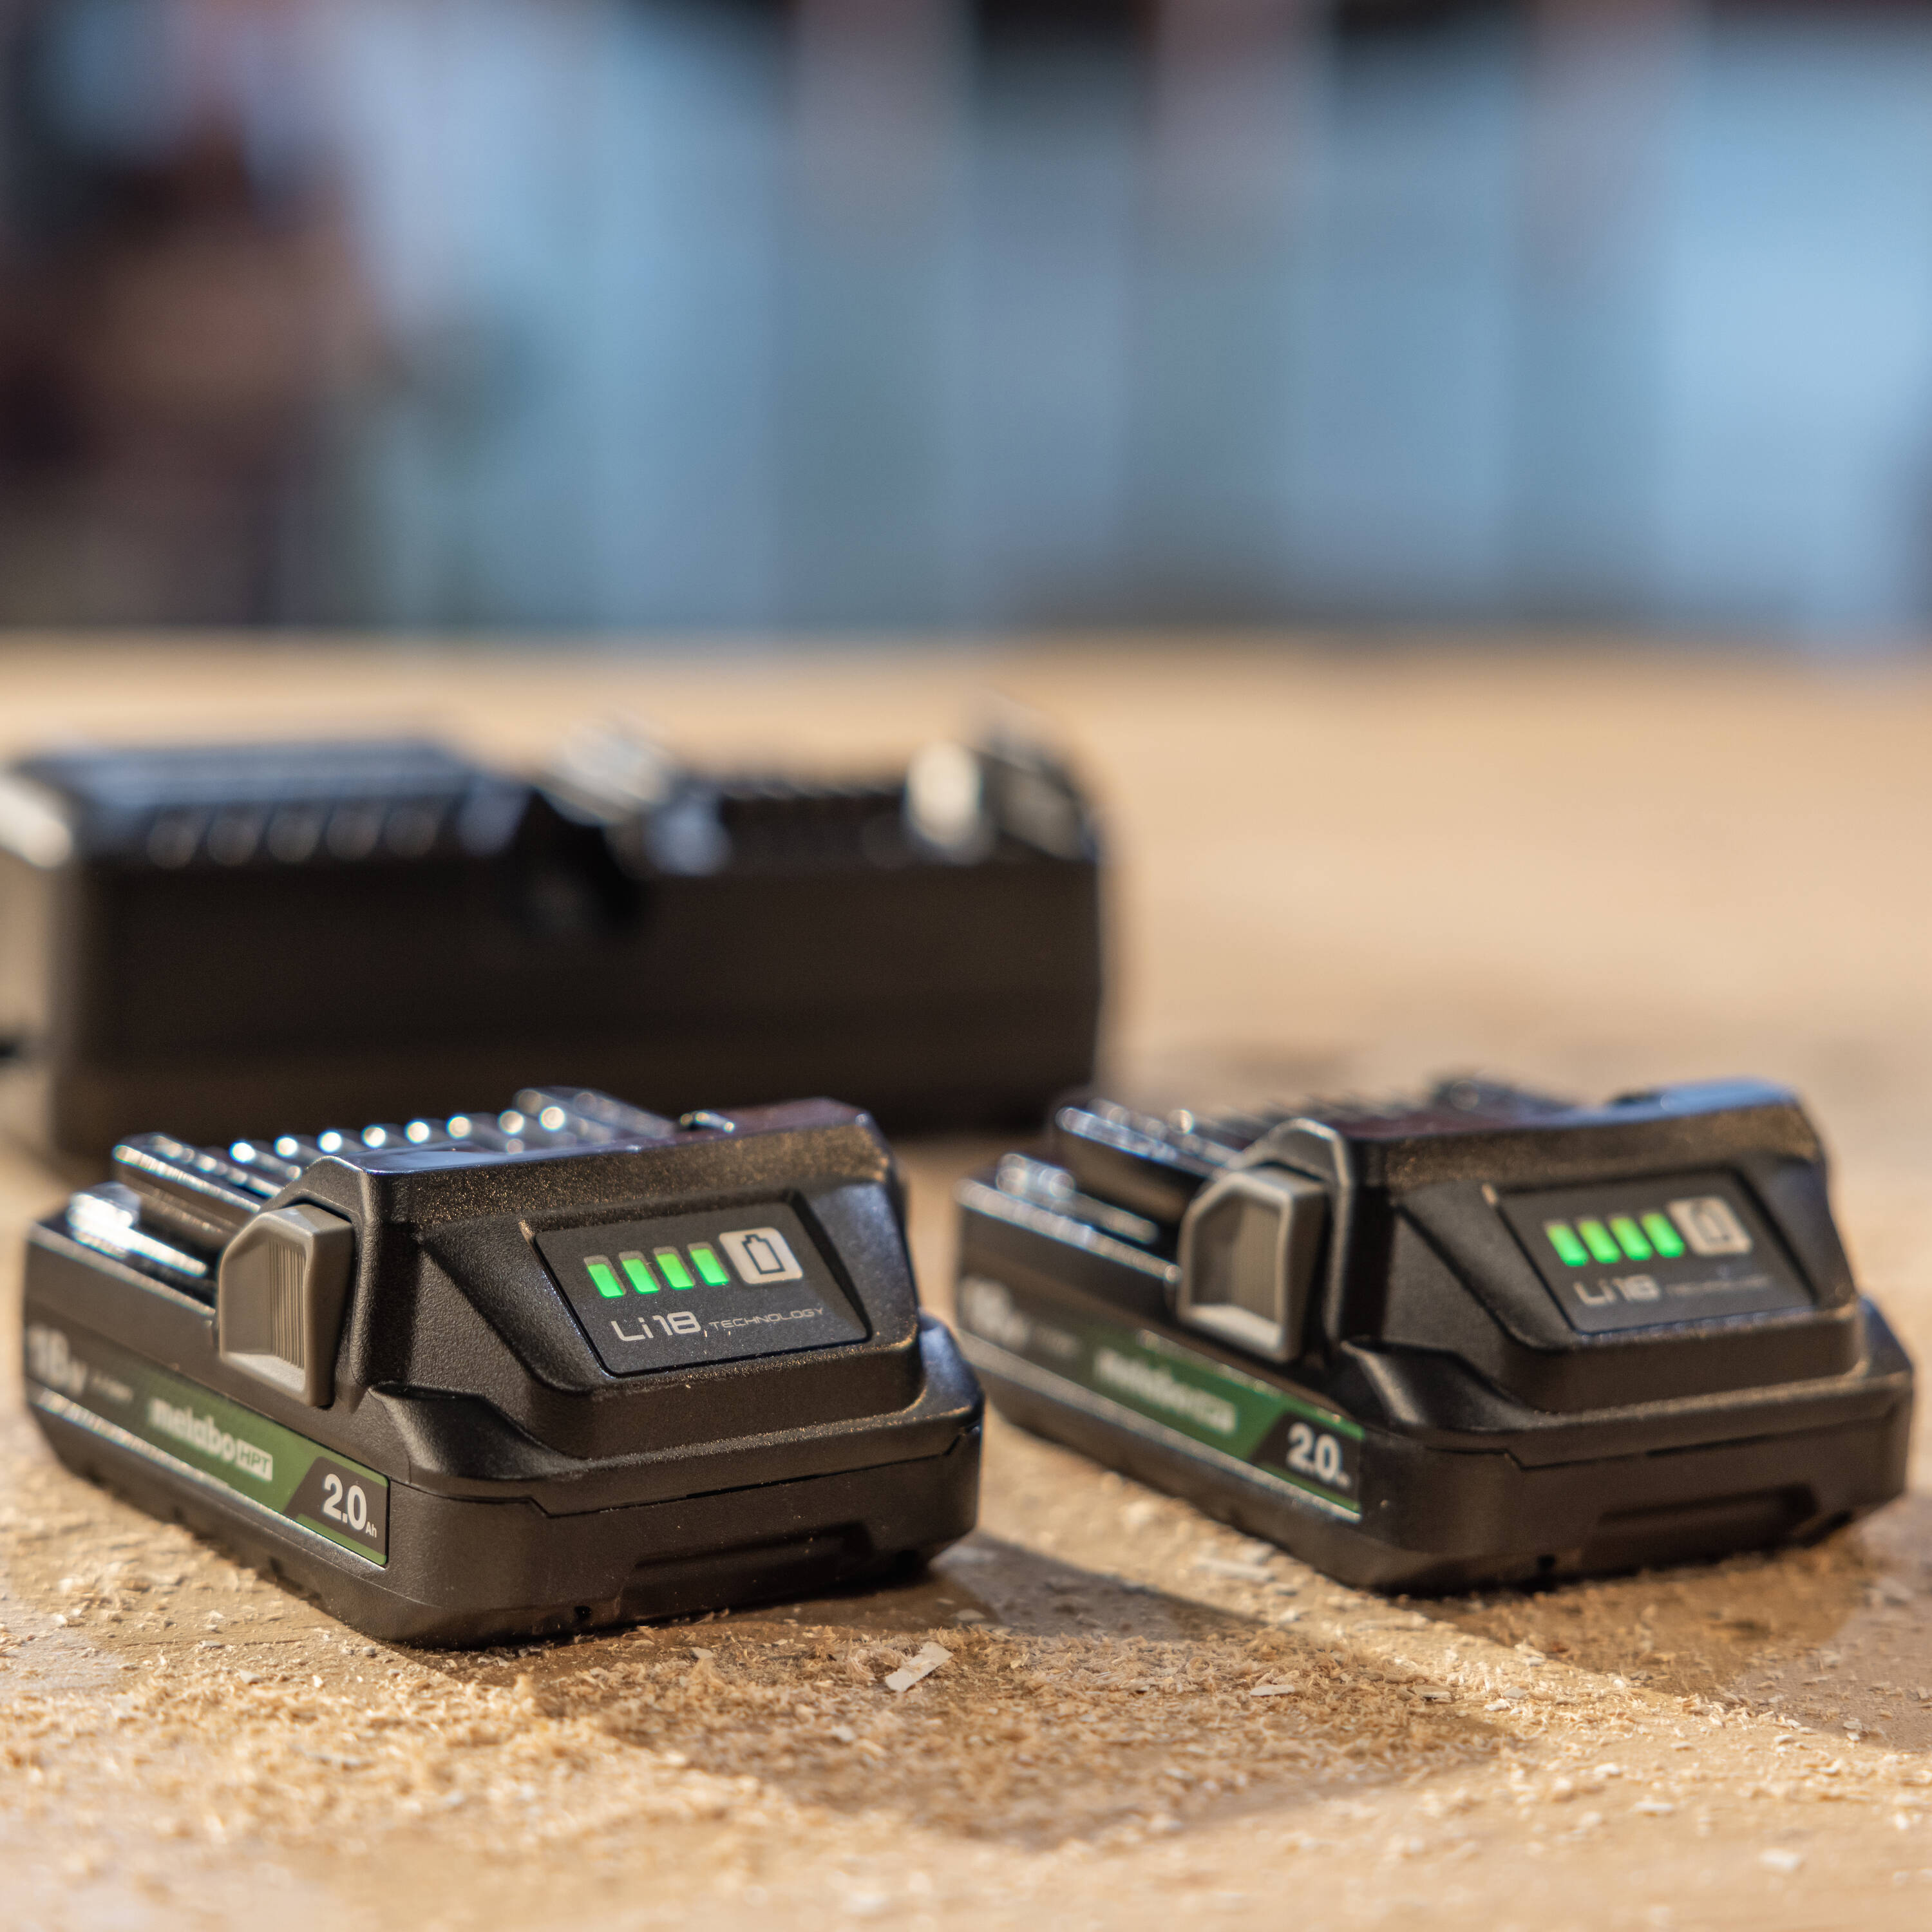 Metabo HPT MultiVolt 18-V 2-Pack Battery Chargers Tool the Charger Included) & Lithium-ion Power at in and (Charger Batteries department